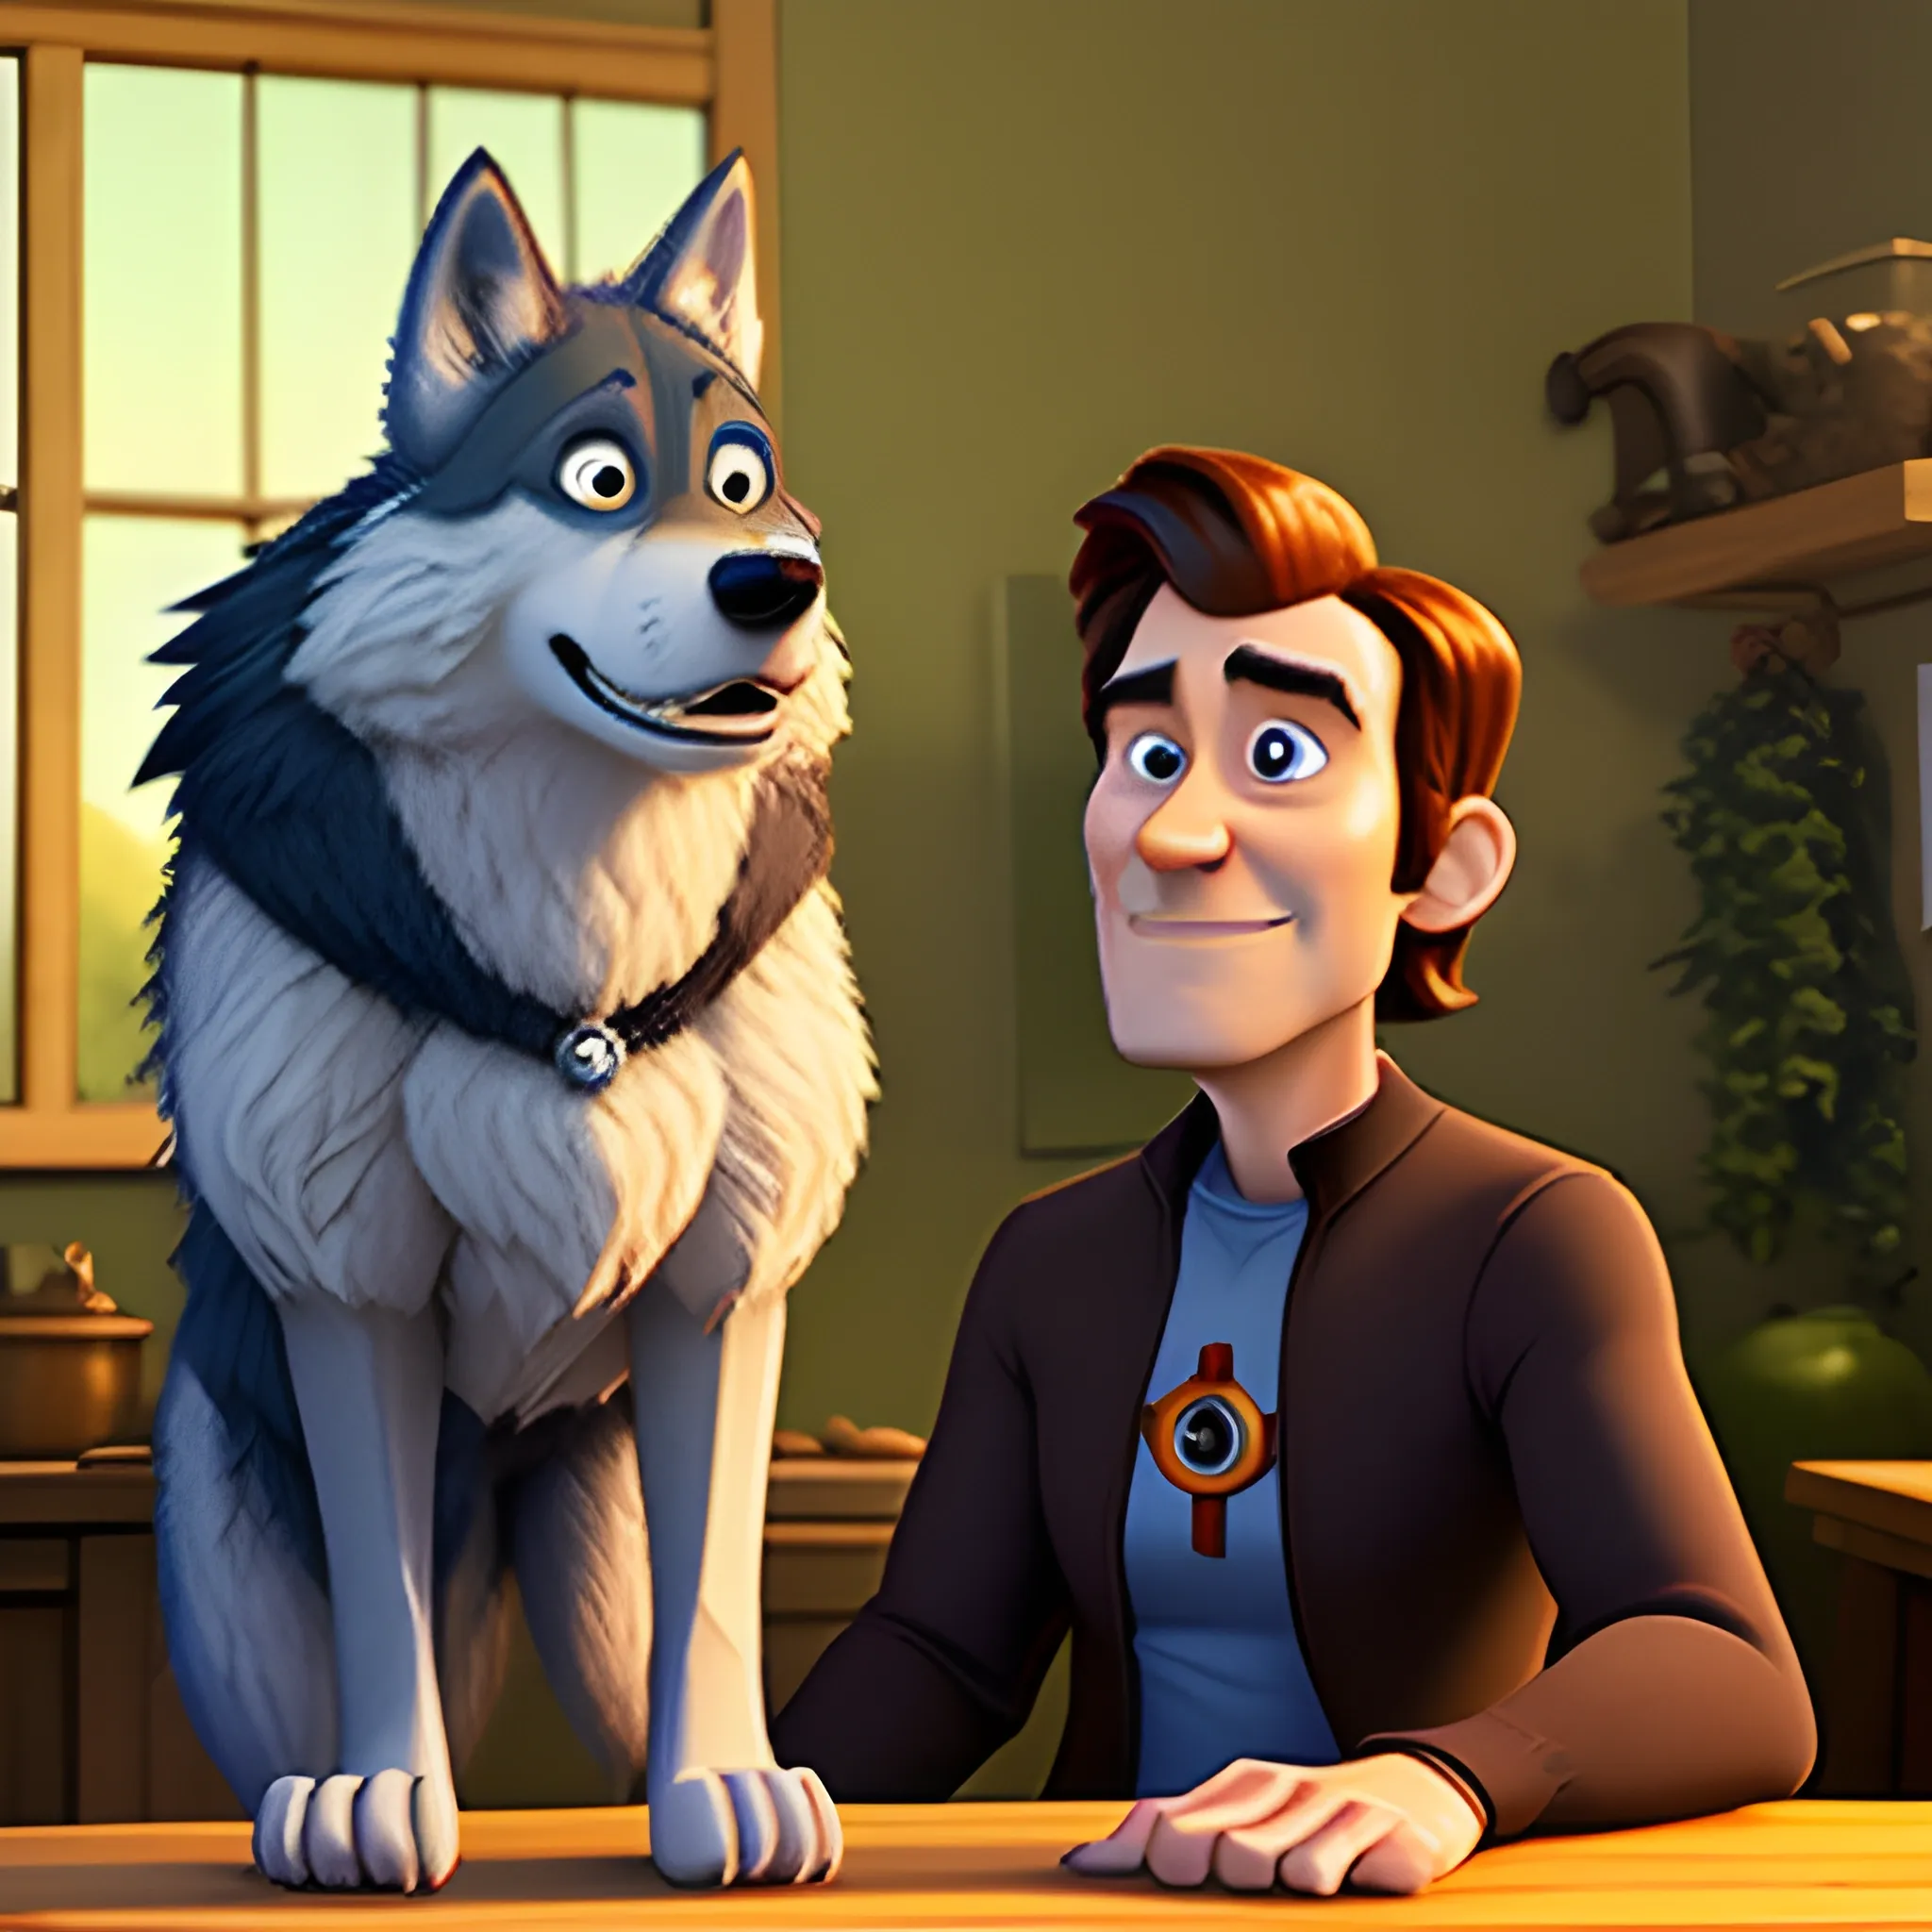 pixar's UP, starring a boy and his pet wolf